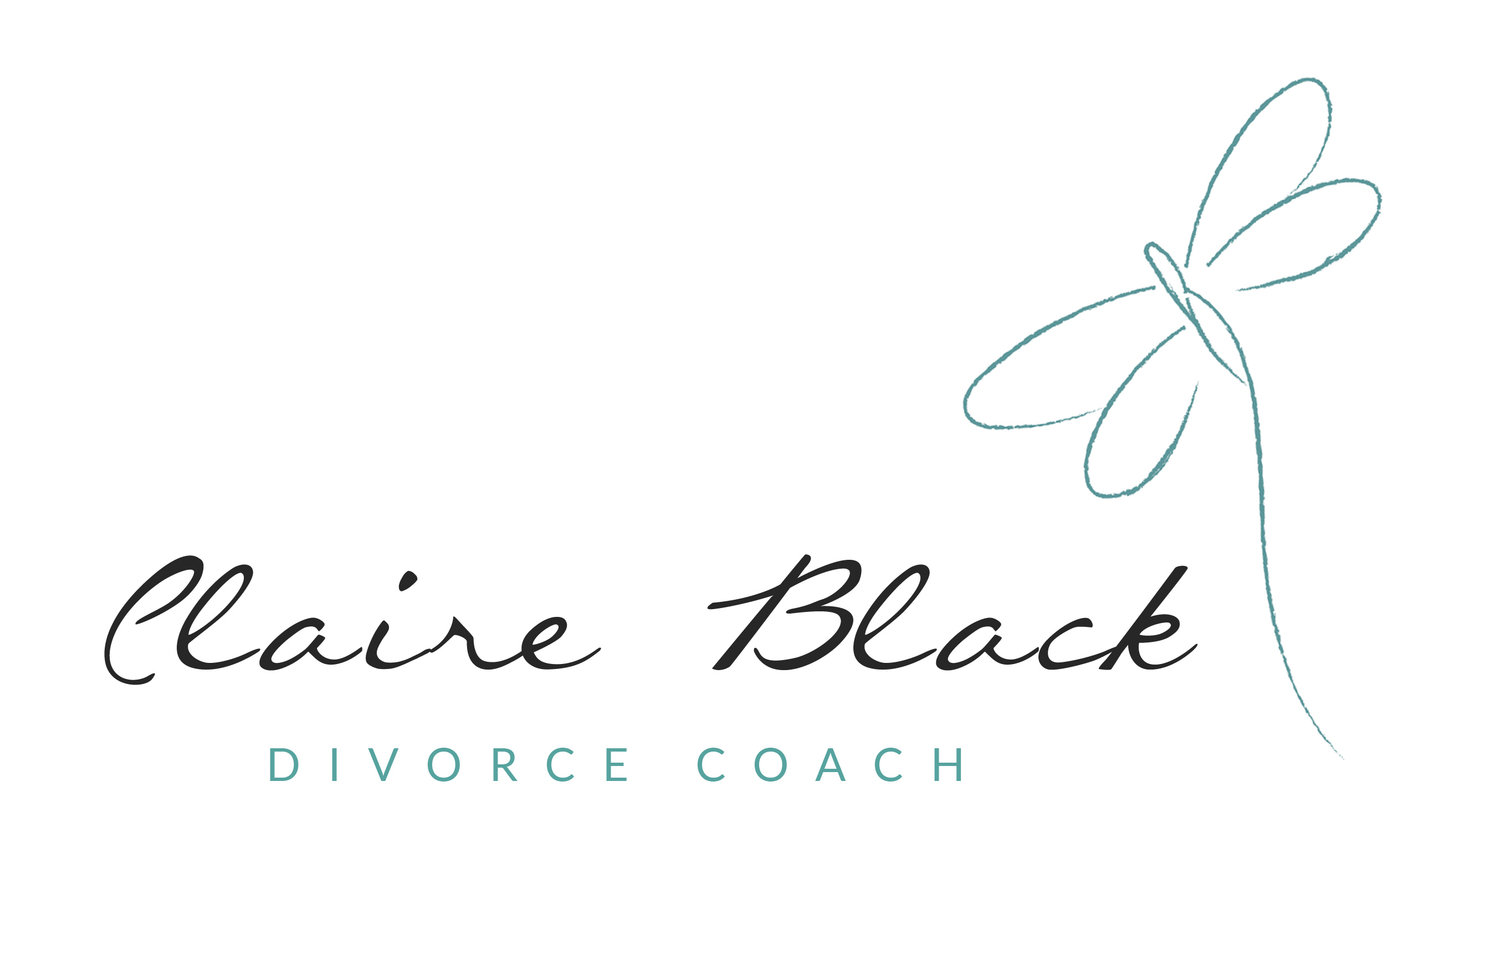 From Crisis to Confidence. Leading divorce coach Claire Black launches a book to help anyone facing heartbreak from a sudden separation.